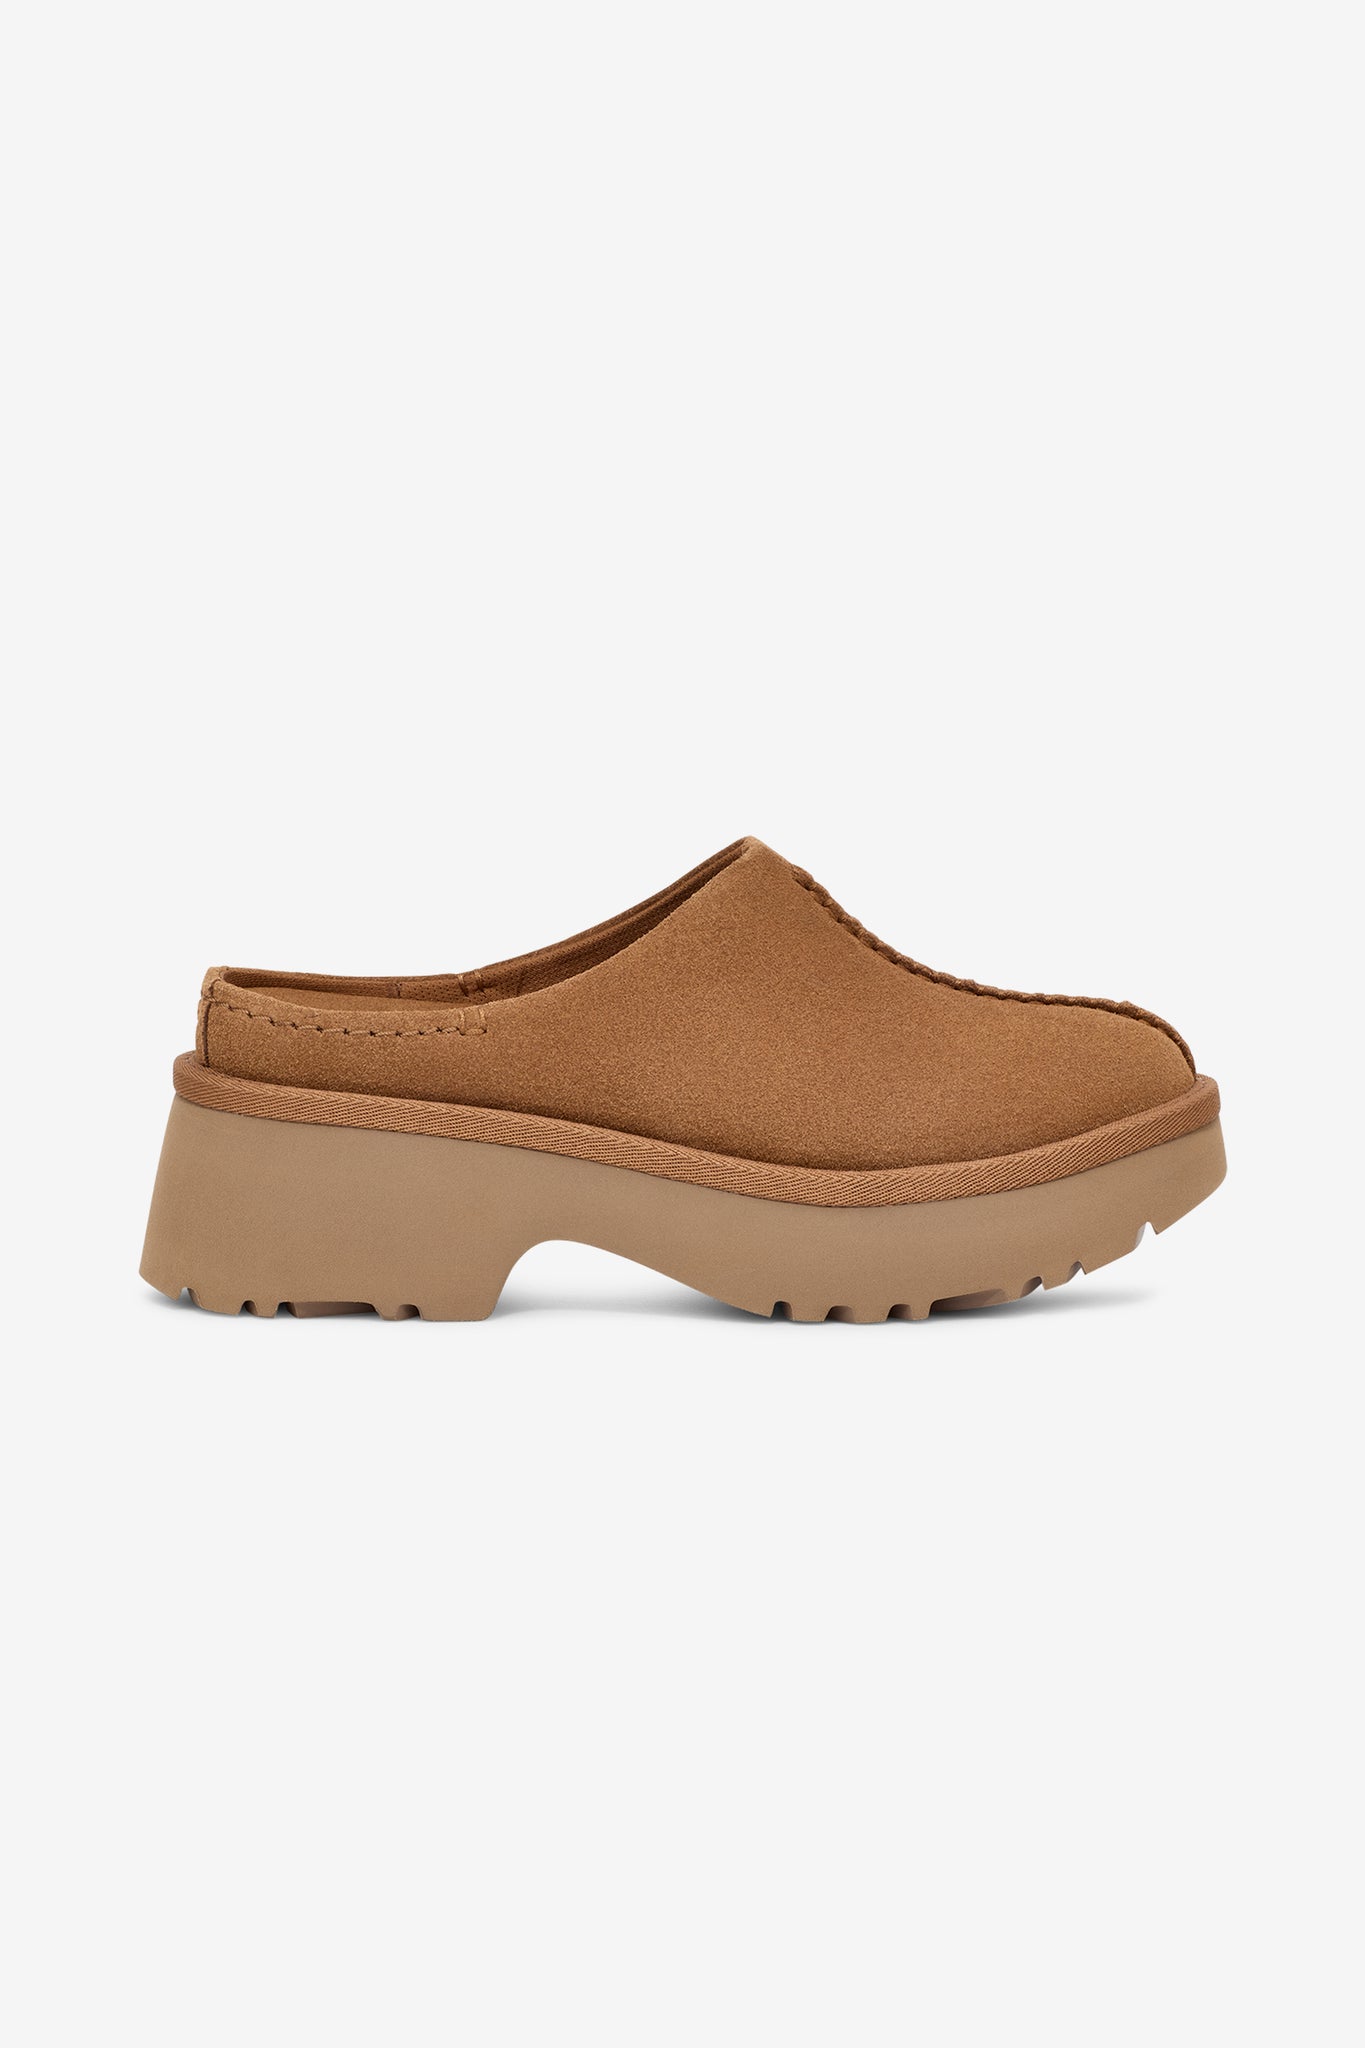 UGG Women's New Heights Clog in Chestnut